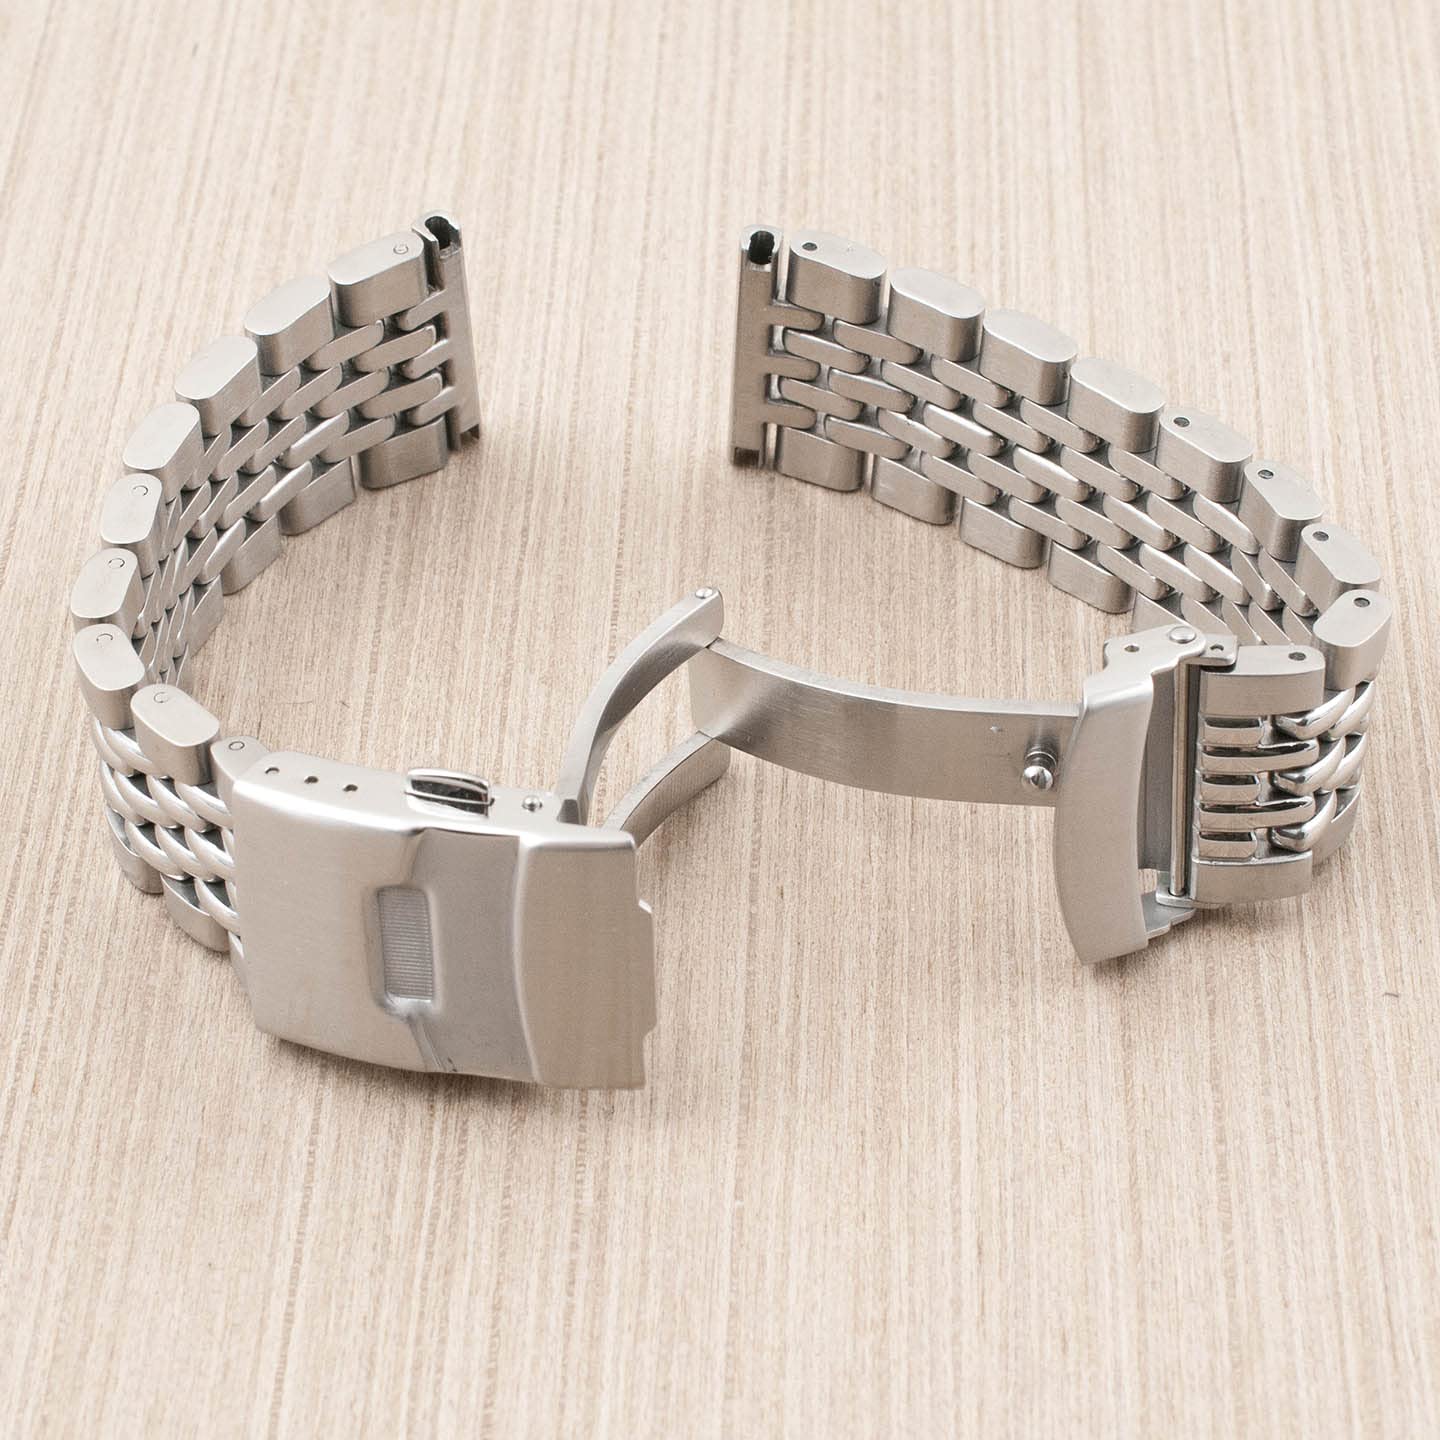 StrapHabit Beads of Rice Watch Bracelet Band Strap - Stainless Steel Vintage BOR 18mm 19mm 20mm 21mm 22mm 24mm